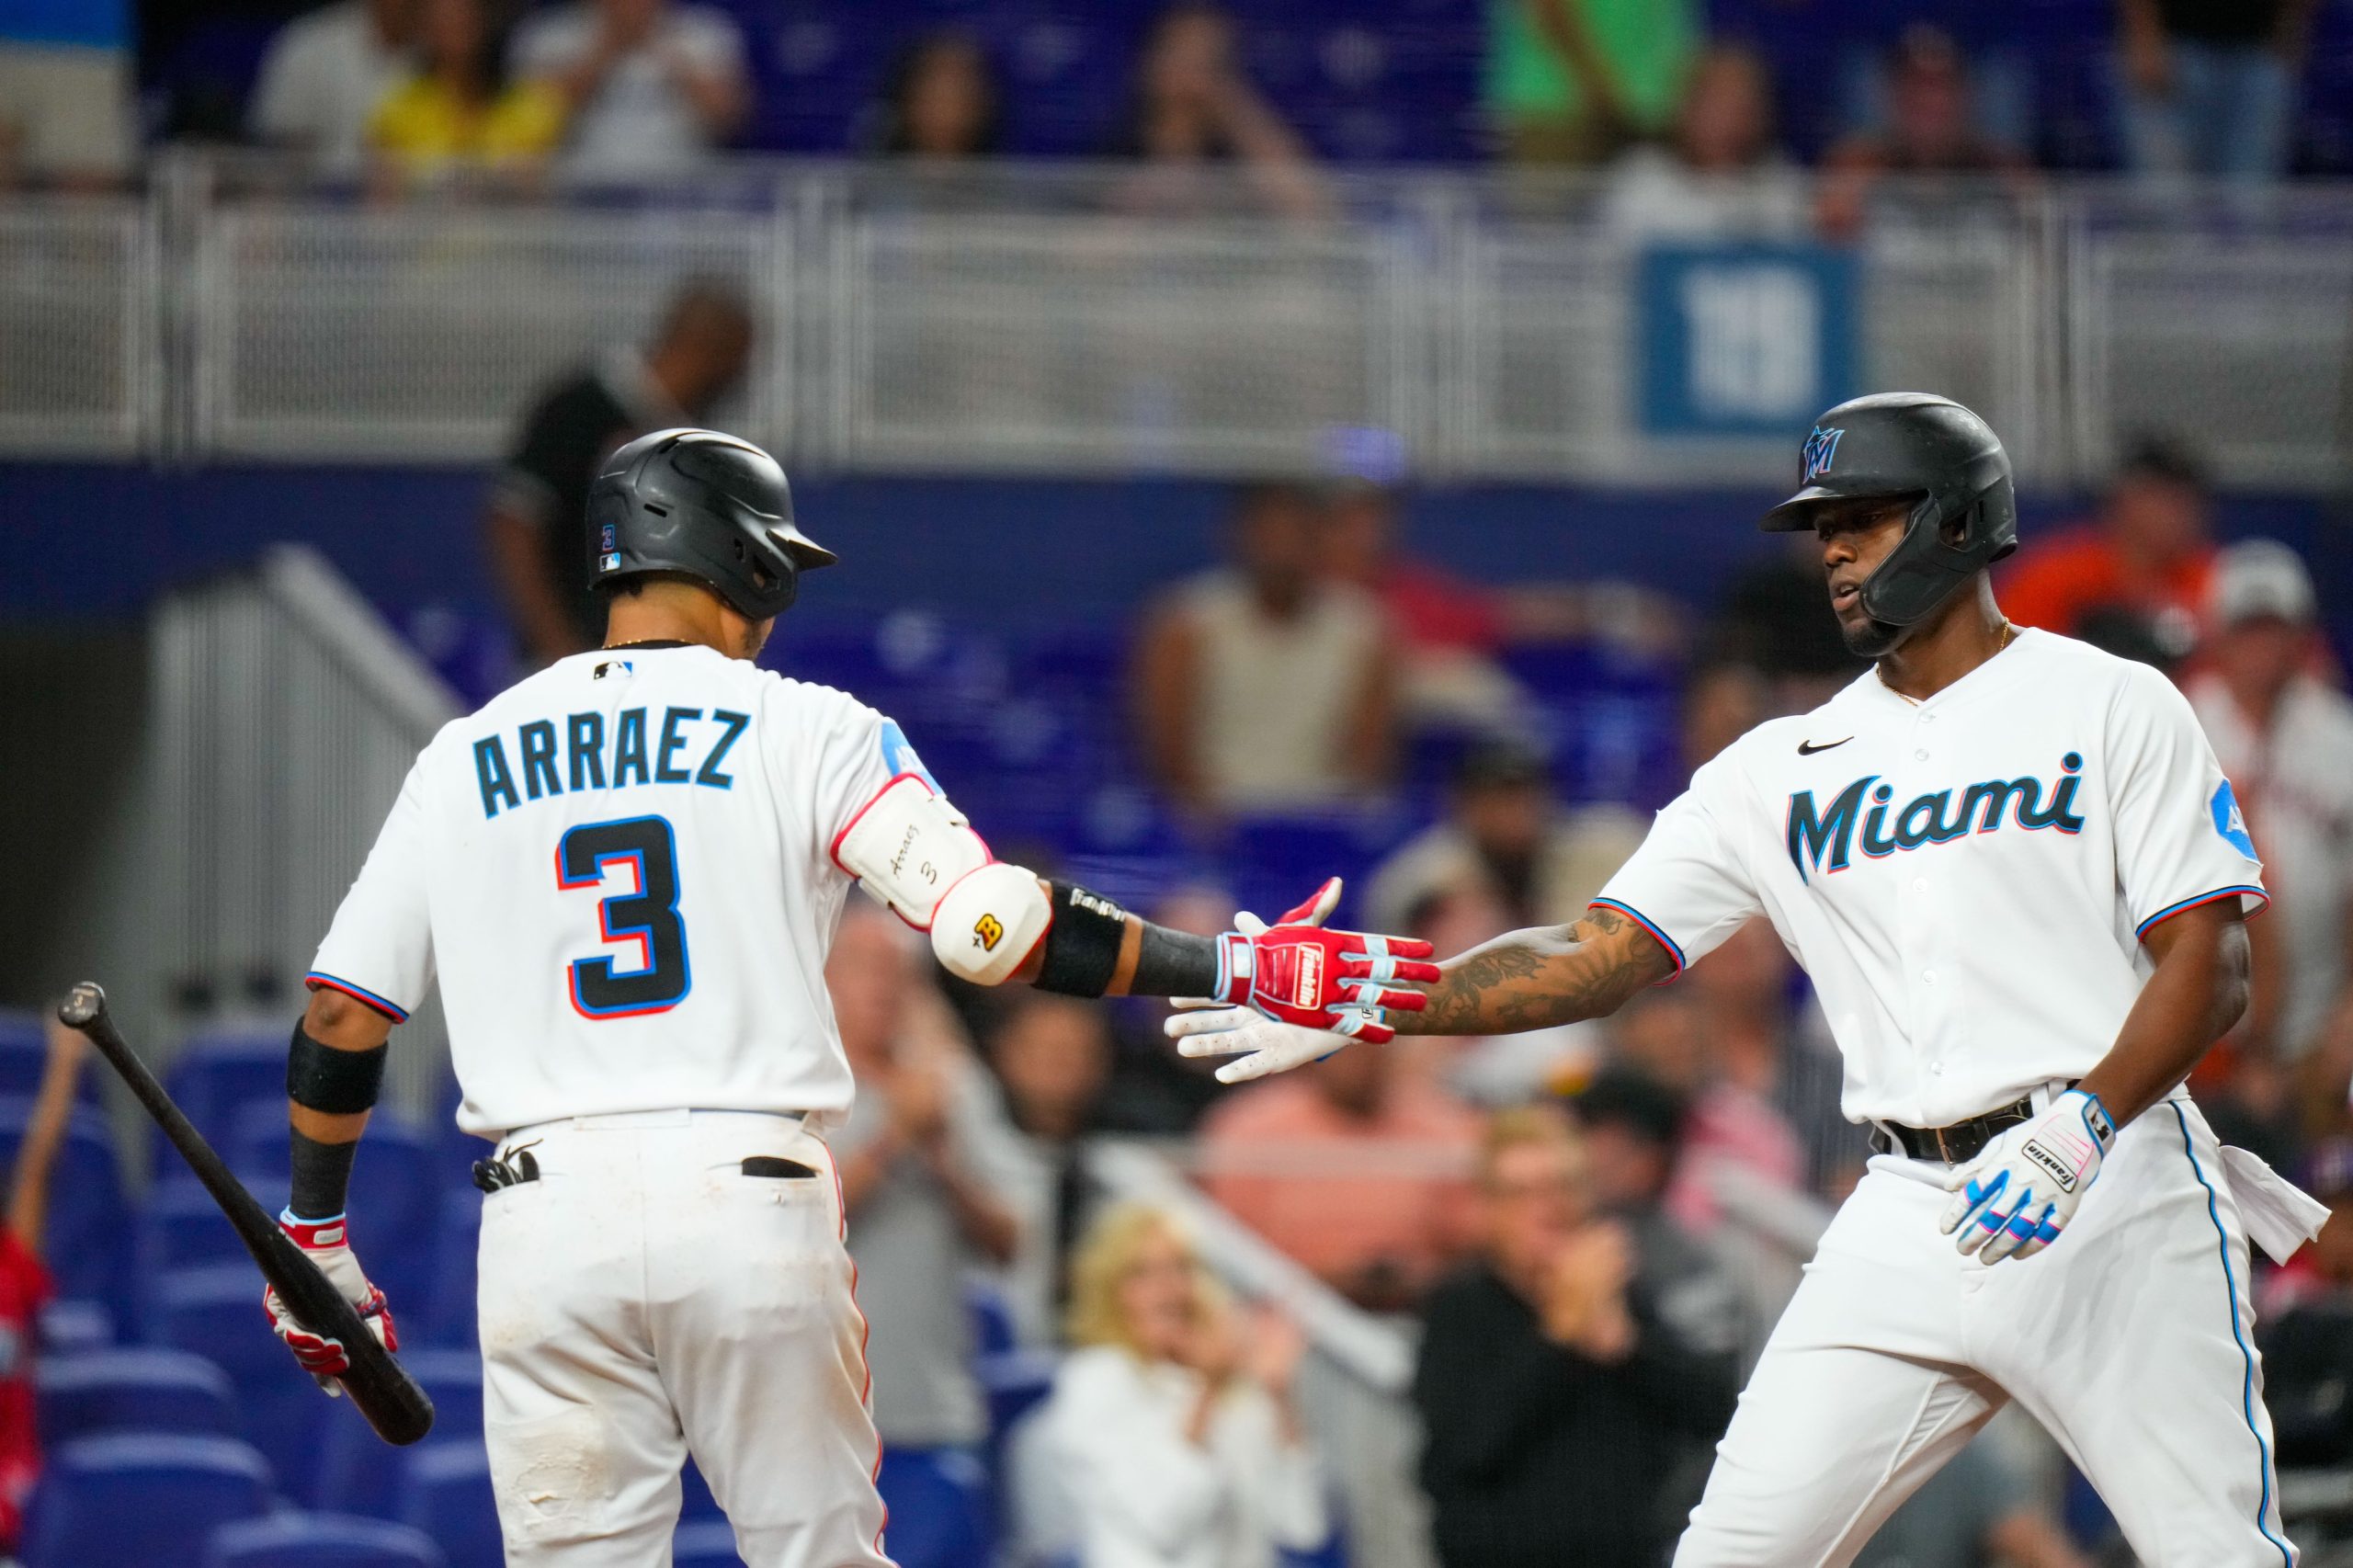 Marlins homer off opening at-bat in first game after José